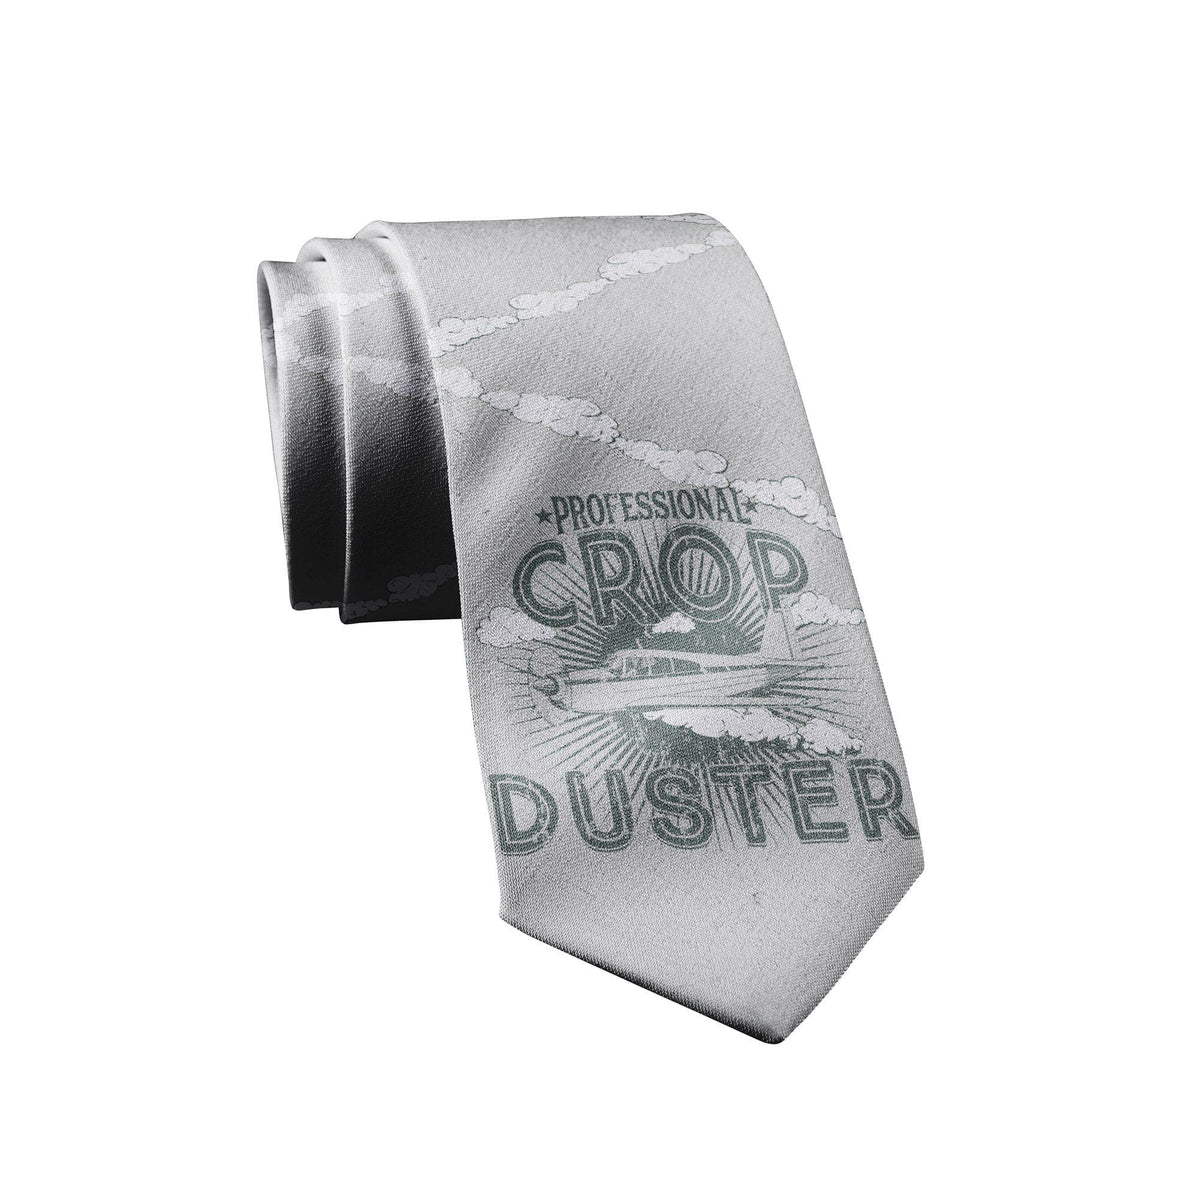 Professional Crop Duster Neck Tie - Crazy Dog T-Shirts